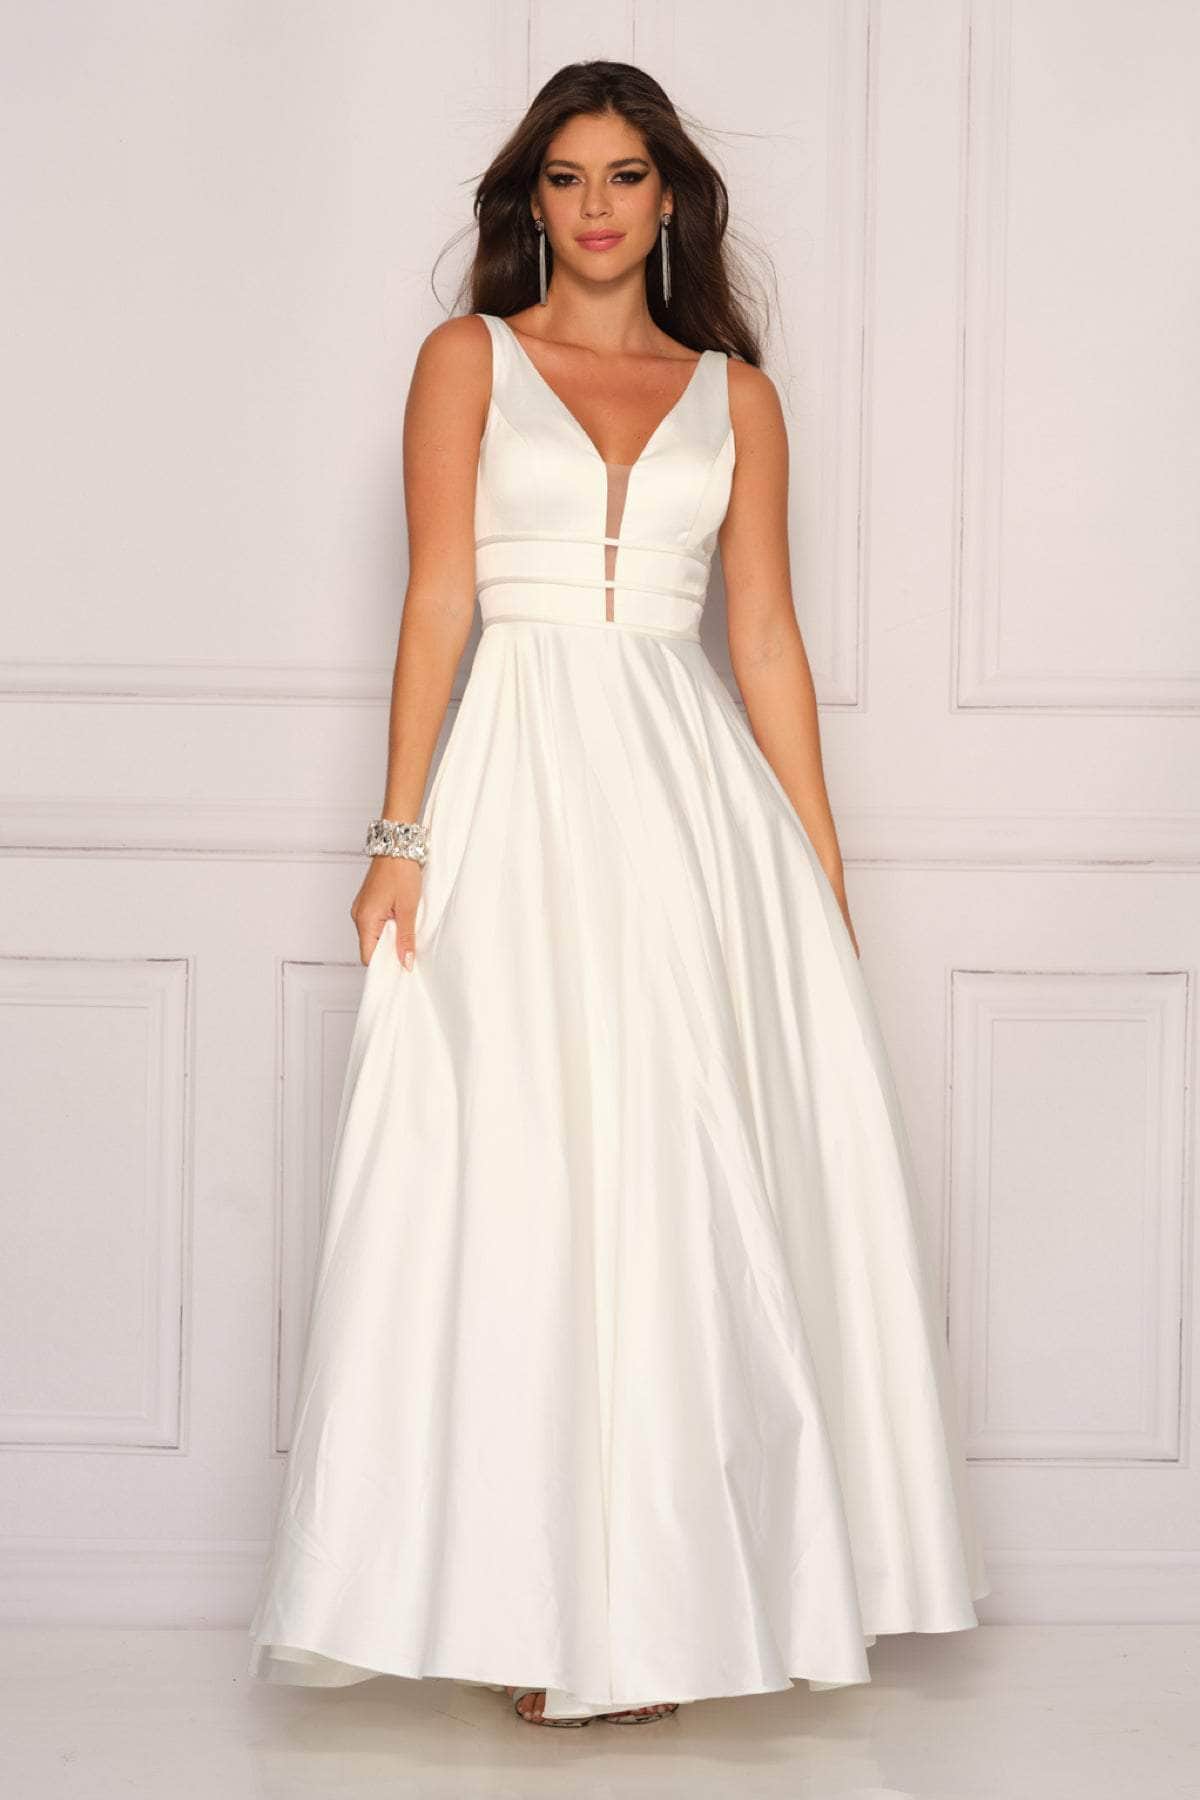 Dave & Johnny 10971 - Sleeveless A-Line Bridal Gown
